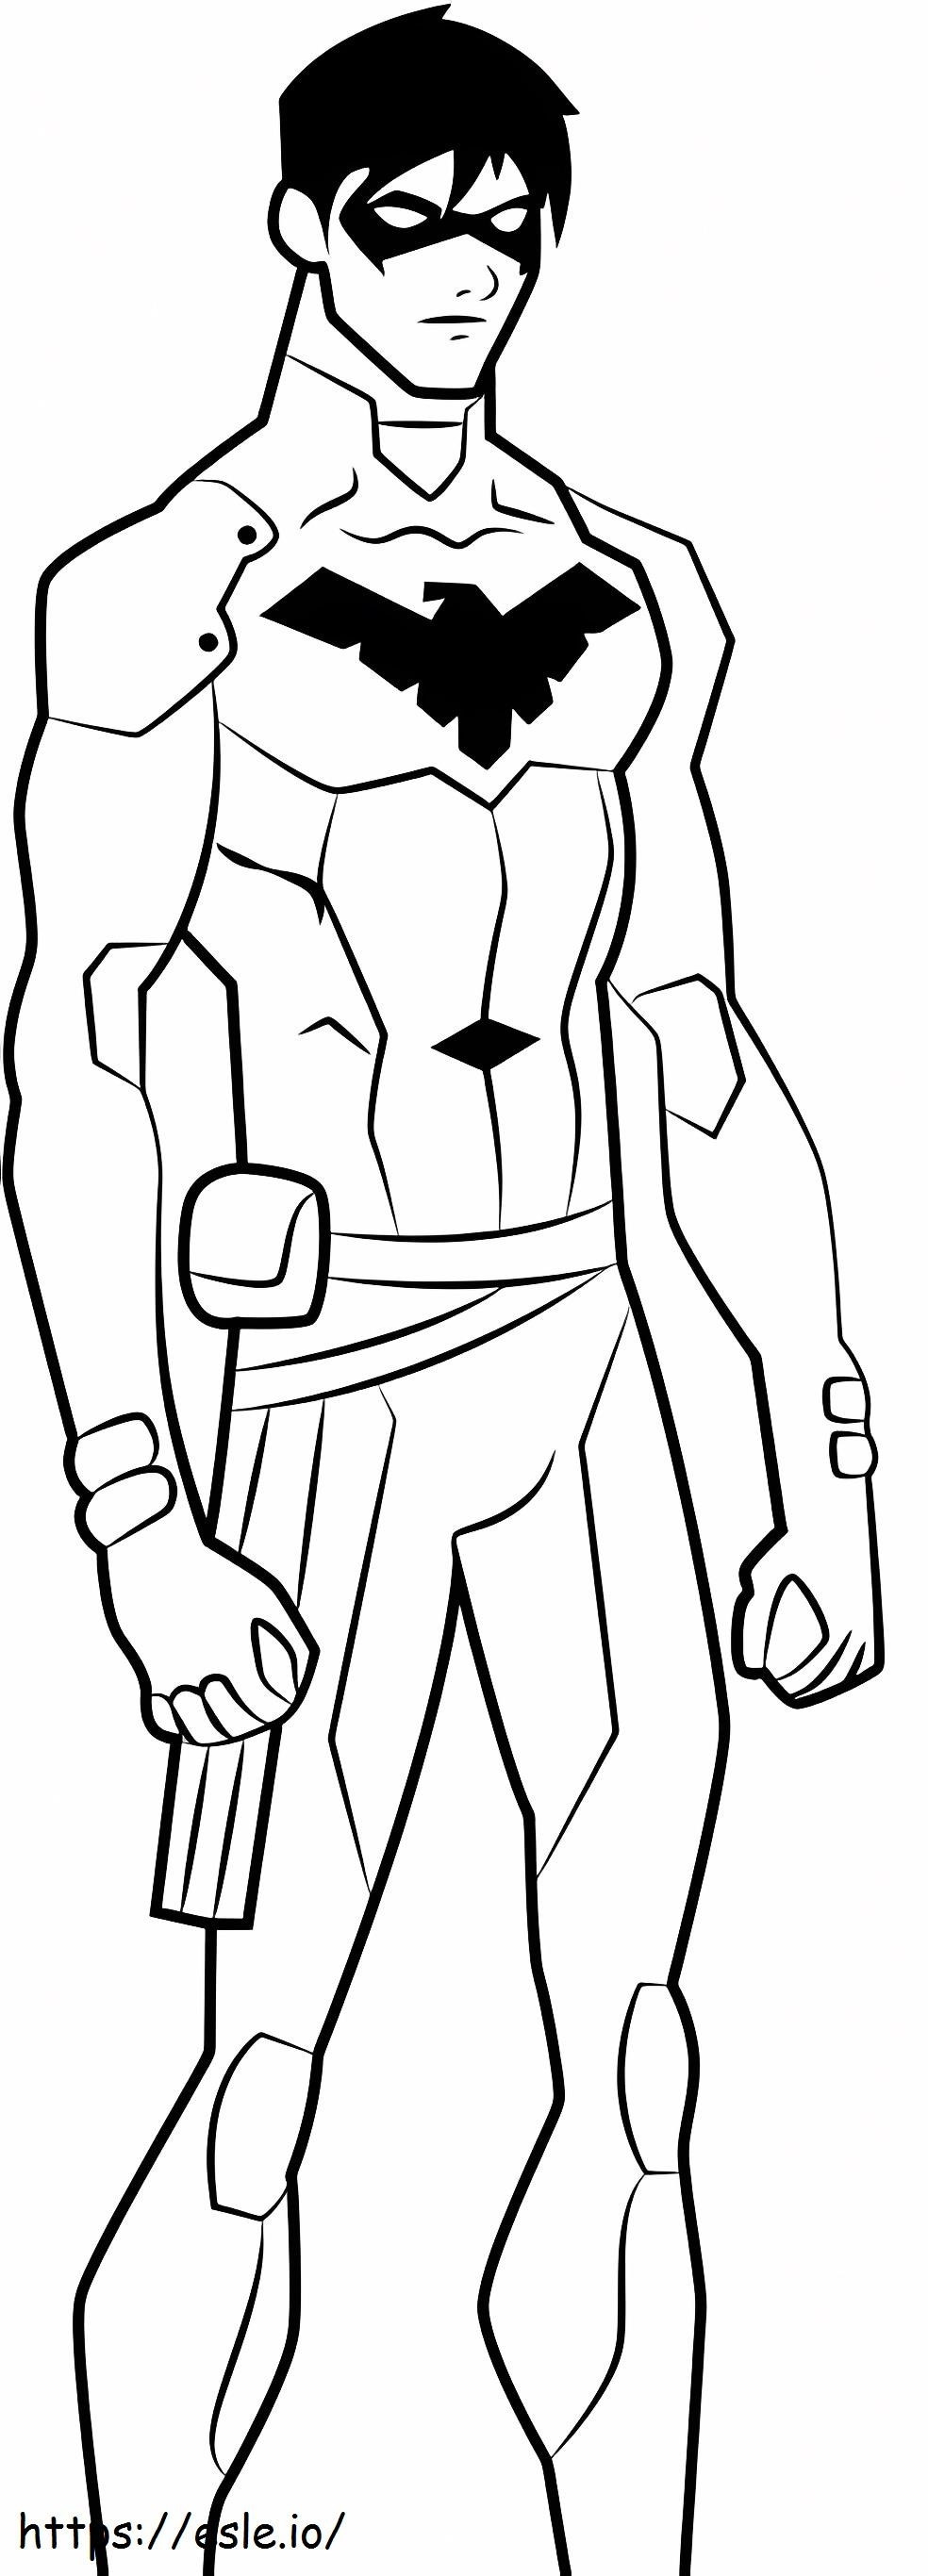 1532055387 Handsome Nightwing A4 coloring page